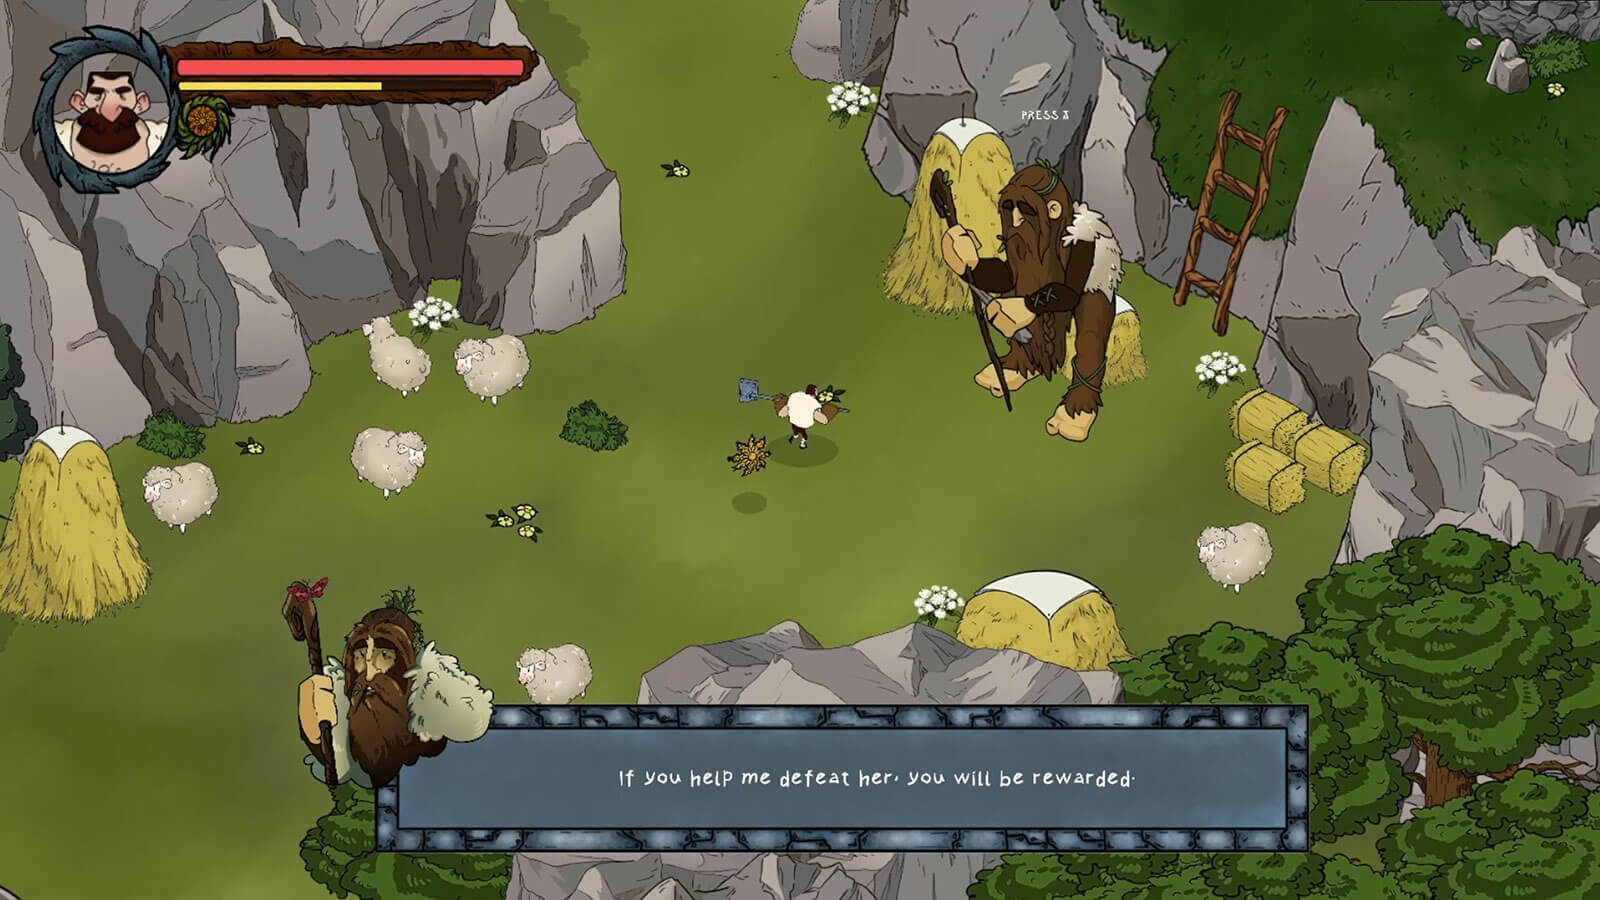 Player engages in a conversation with a giant NPC in a rocky area